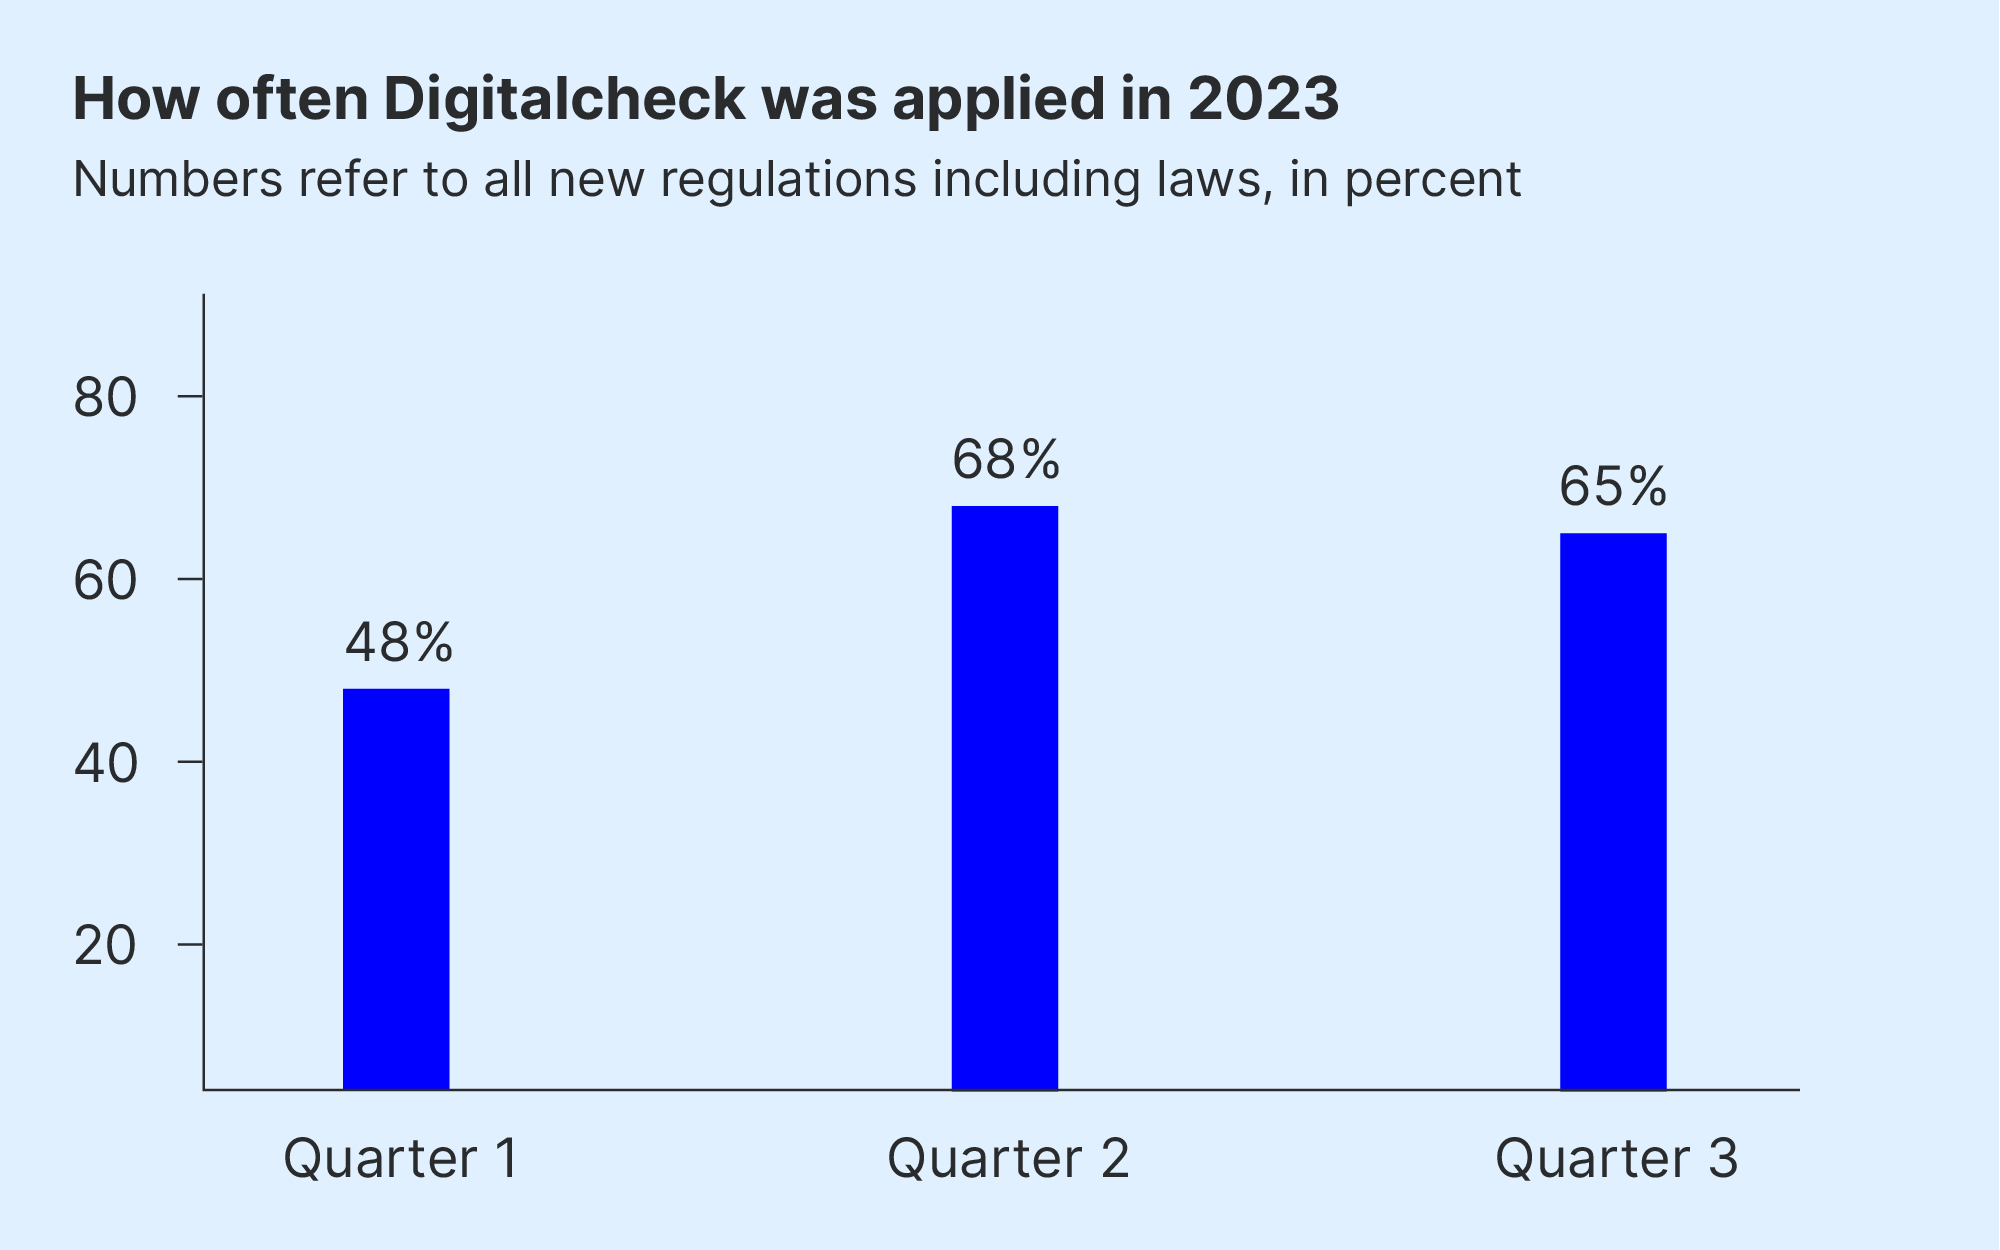 A bar chart shows how often the digital check was used for new regulatory projects (ordinances and laws) in 2023. 48% in the first quarter, 68% in the second quarter and 65% in the third quarter.